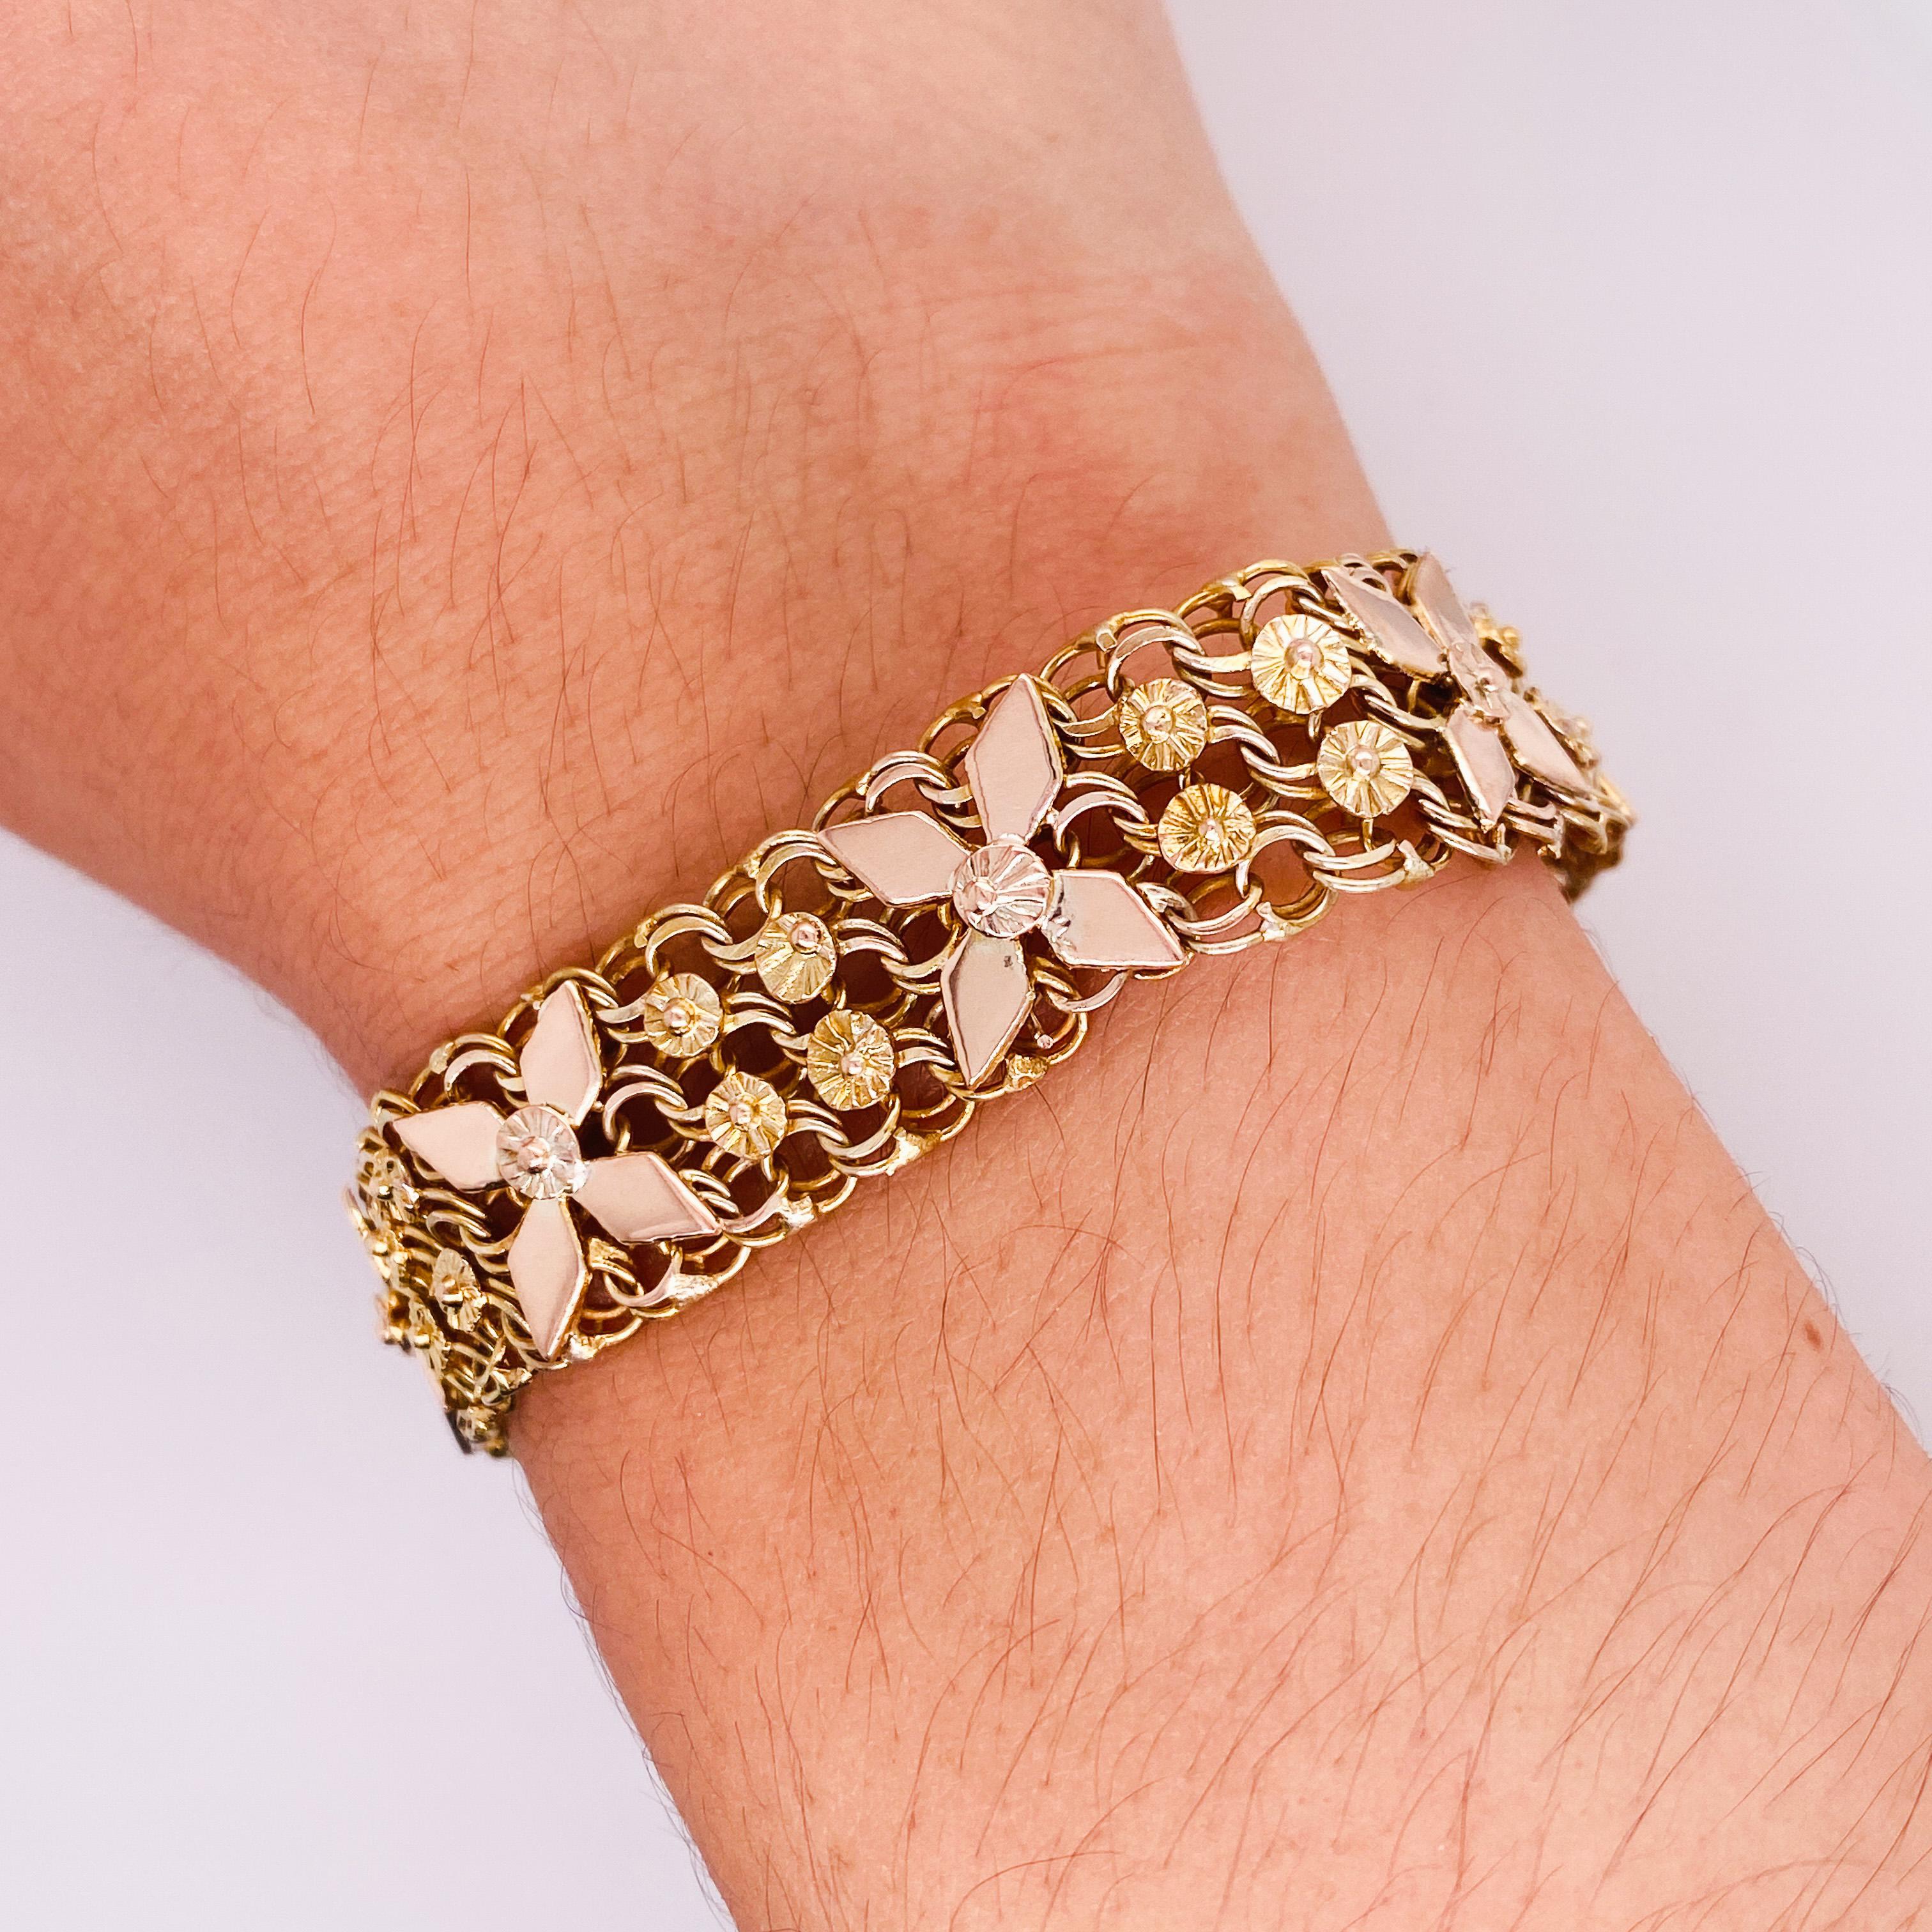 Ten pinwheels in rose gold seem ready to spin as they lay along the top of this wide yellow gold bracelet. Dainty double links form the backdrop to the pinwheels and make the bracelet seem delicate. Small floral discs accent the pinwheel centers and